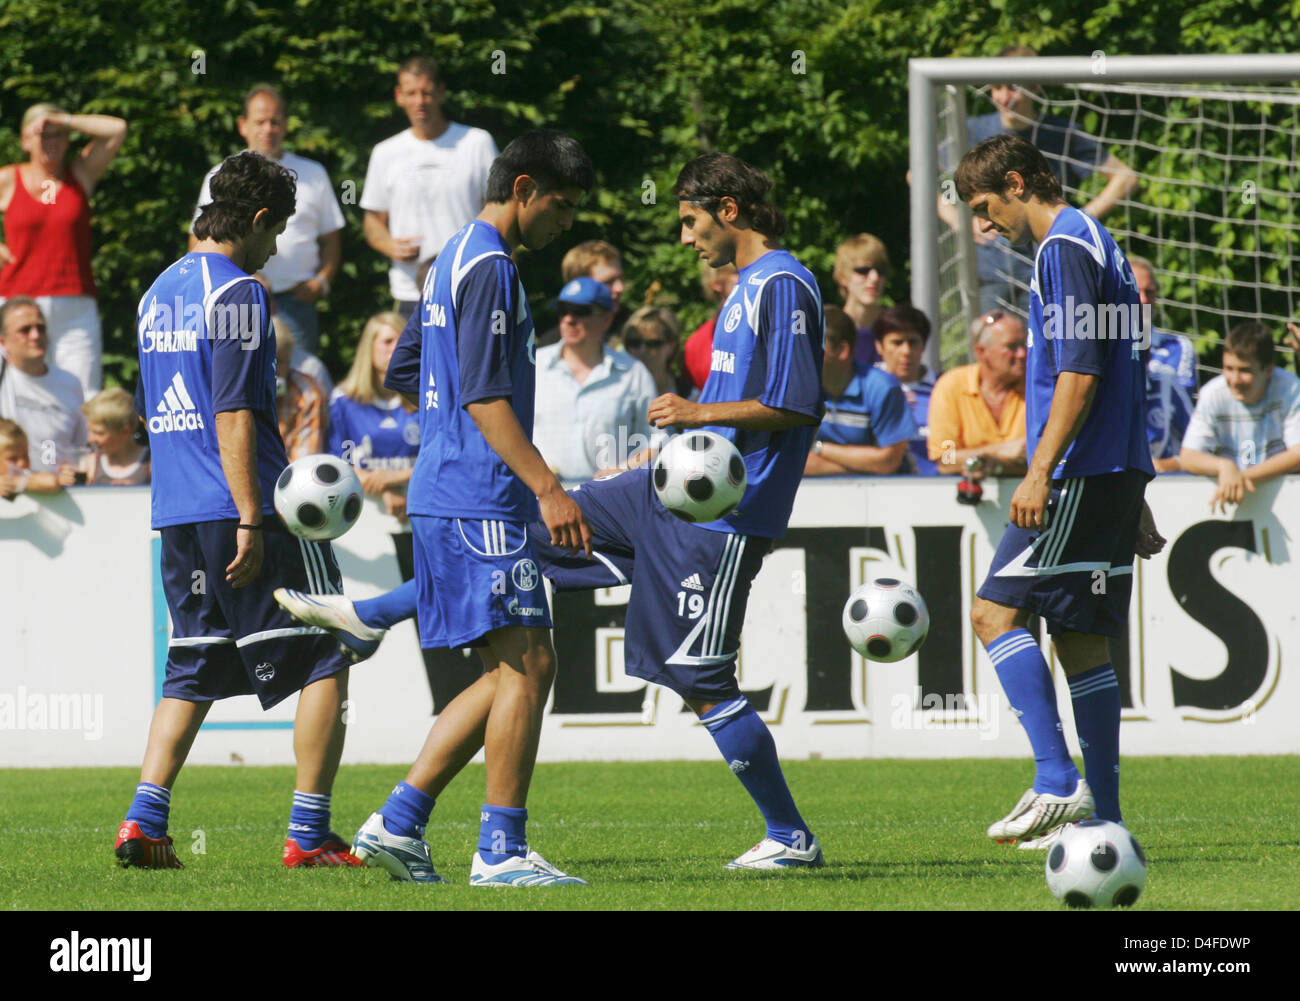 Players of FC Schalke 04 Rafinha (L-R), Carlos Zambrano, Halil Altintop and Mladen Krstajic are pictured during the kick-off training at the club's training grounds in Gelsenkirchen, Germany, 01 July 2008. The Bundesliga season 2008/2009 starts on 15 August. Photo: Bernd Thissen Stock Photo